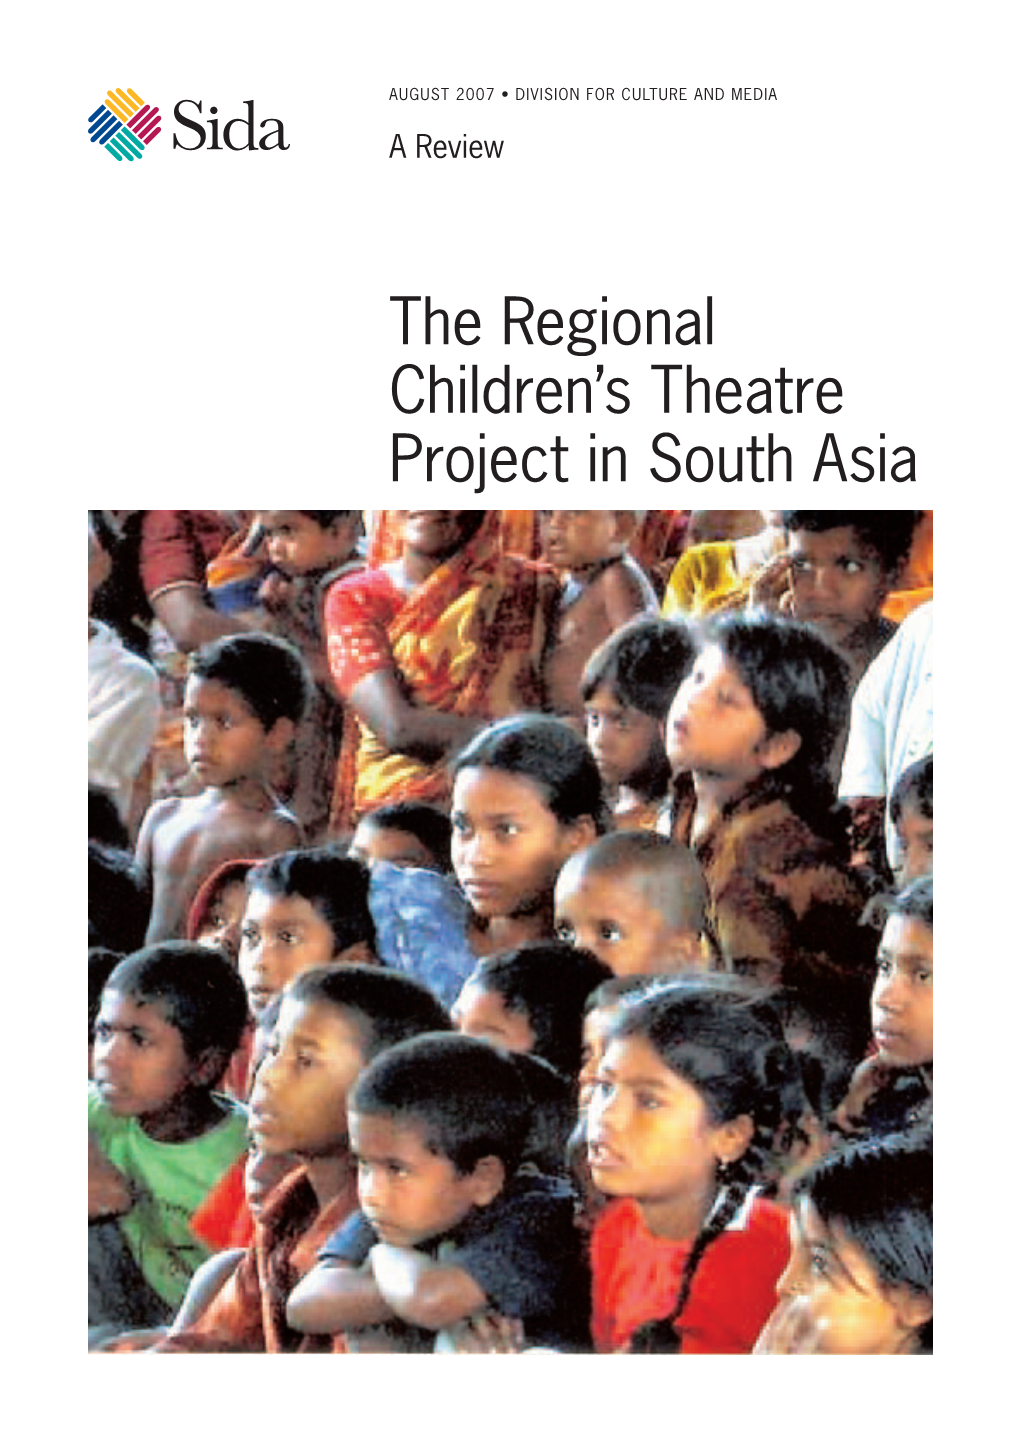 The Regional Children's Theatre Project in South Asia